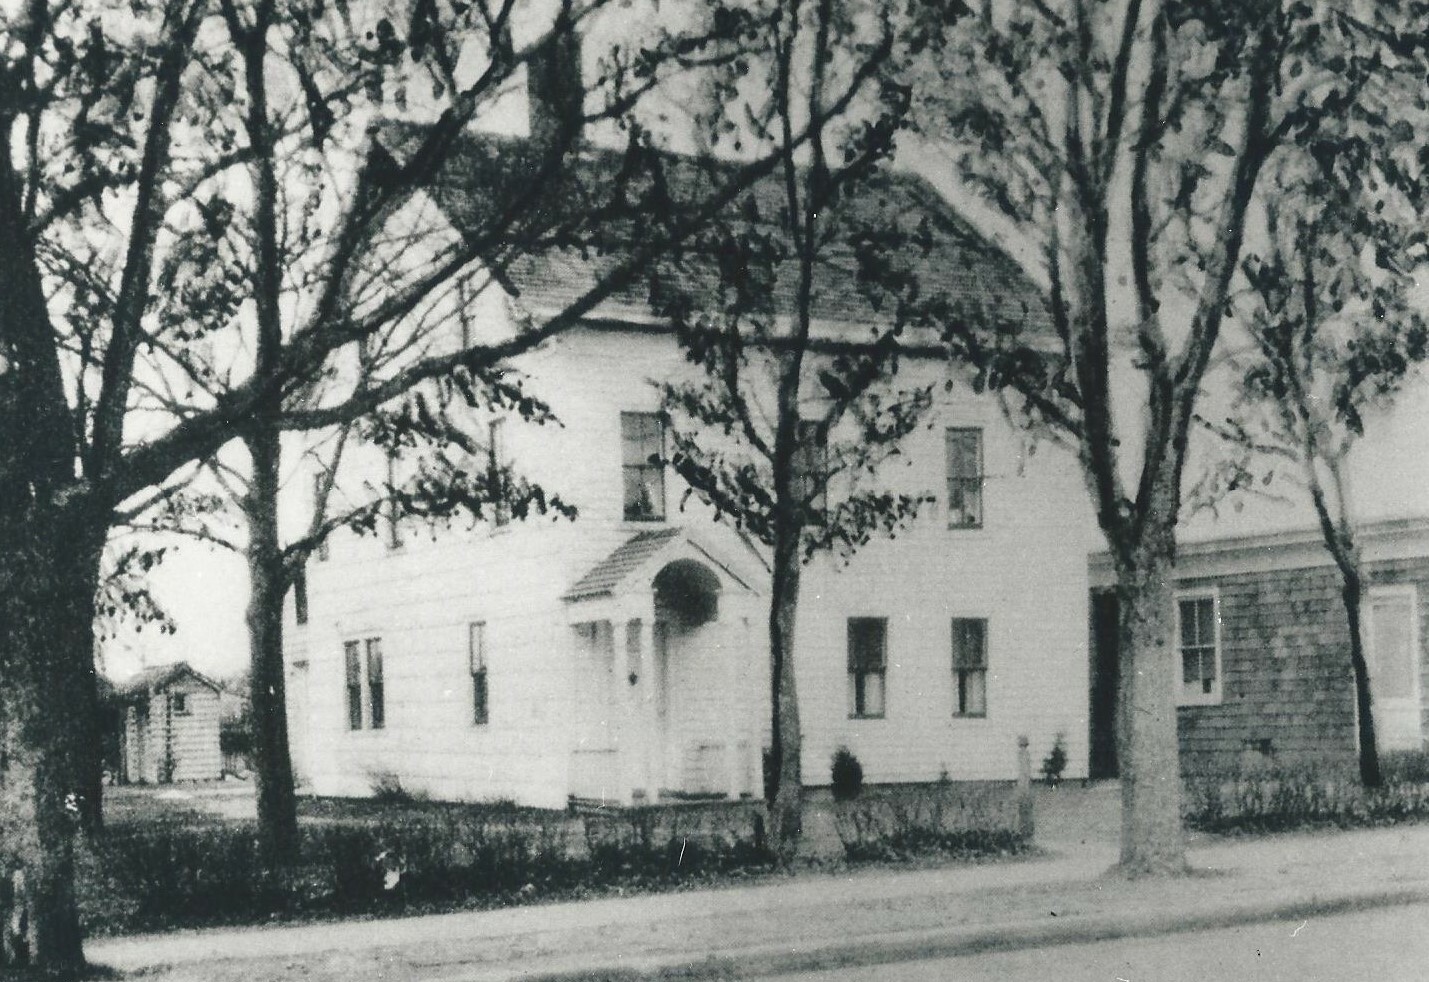 Part of the former Halsey Foster Homestead was East Quogue's first school.